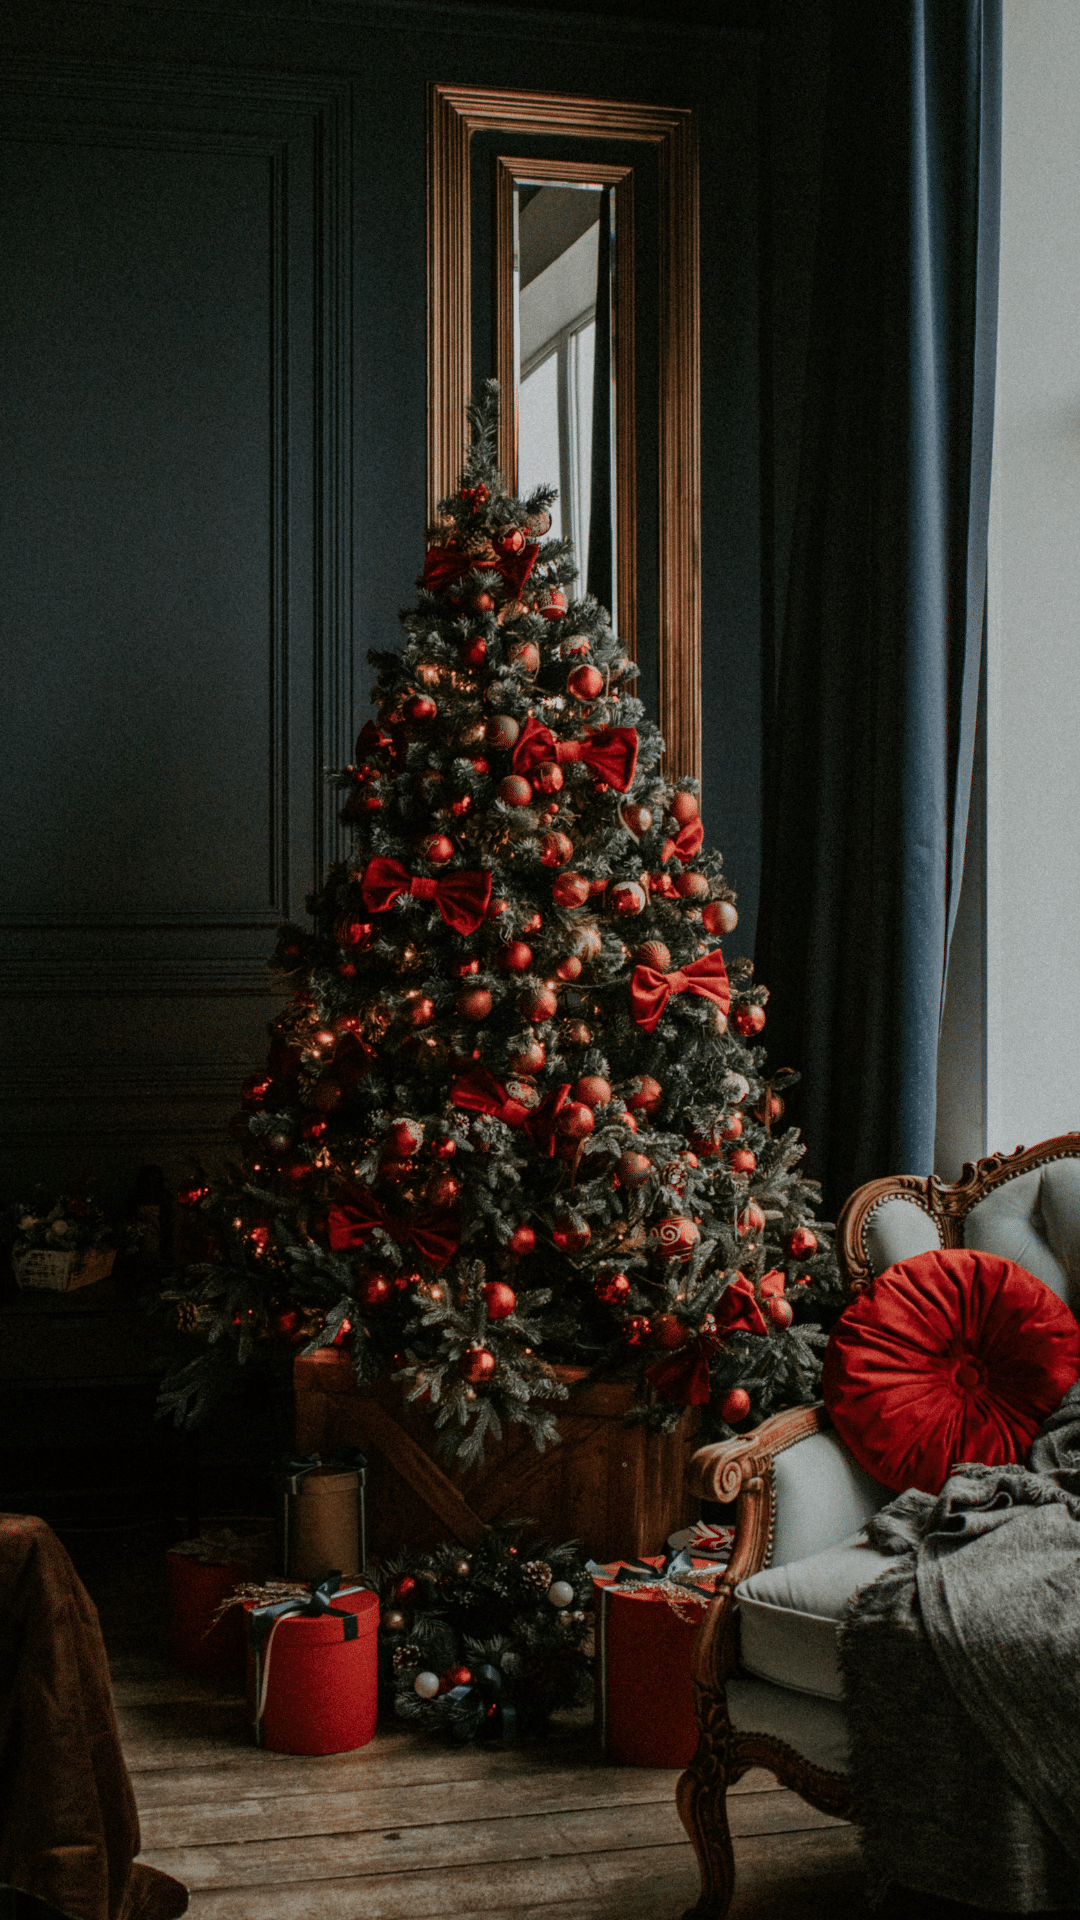 60 FREE Aesthetic Christmas Wallpapers For A Festive Phone 1080x1920